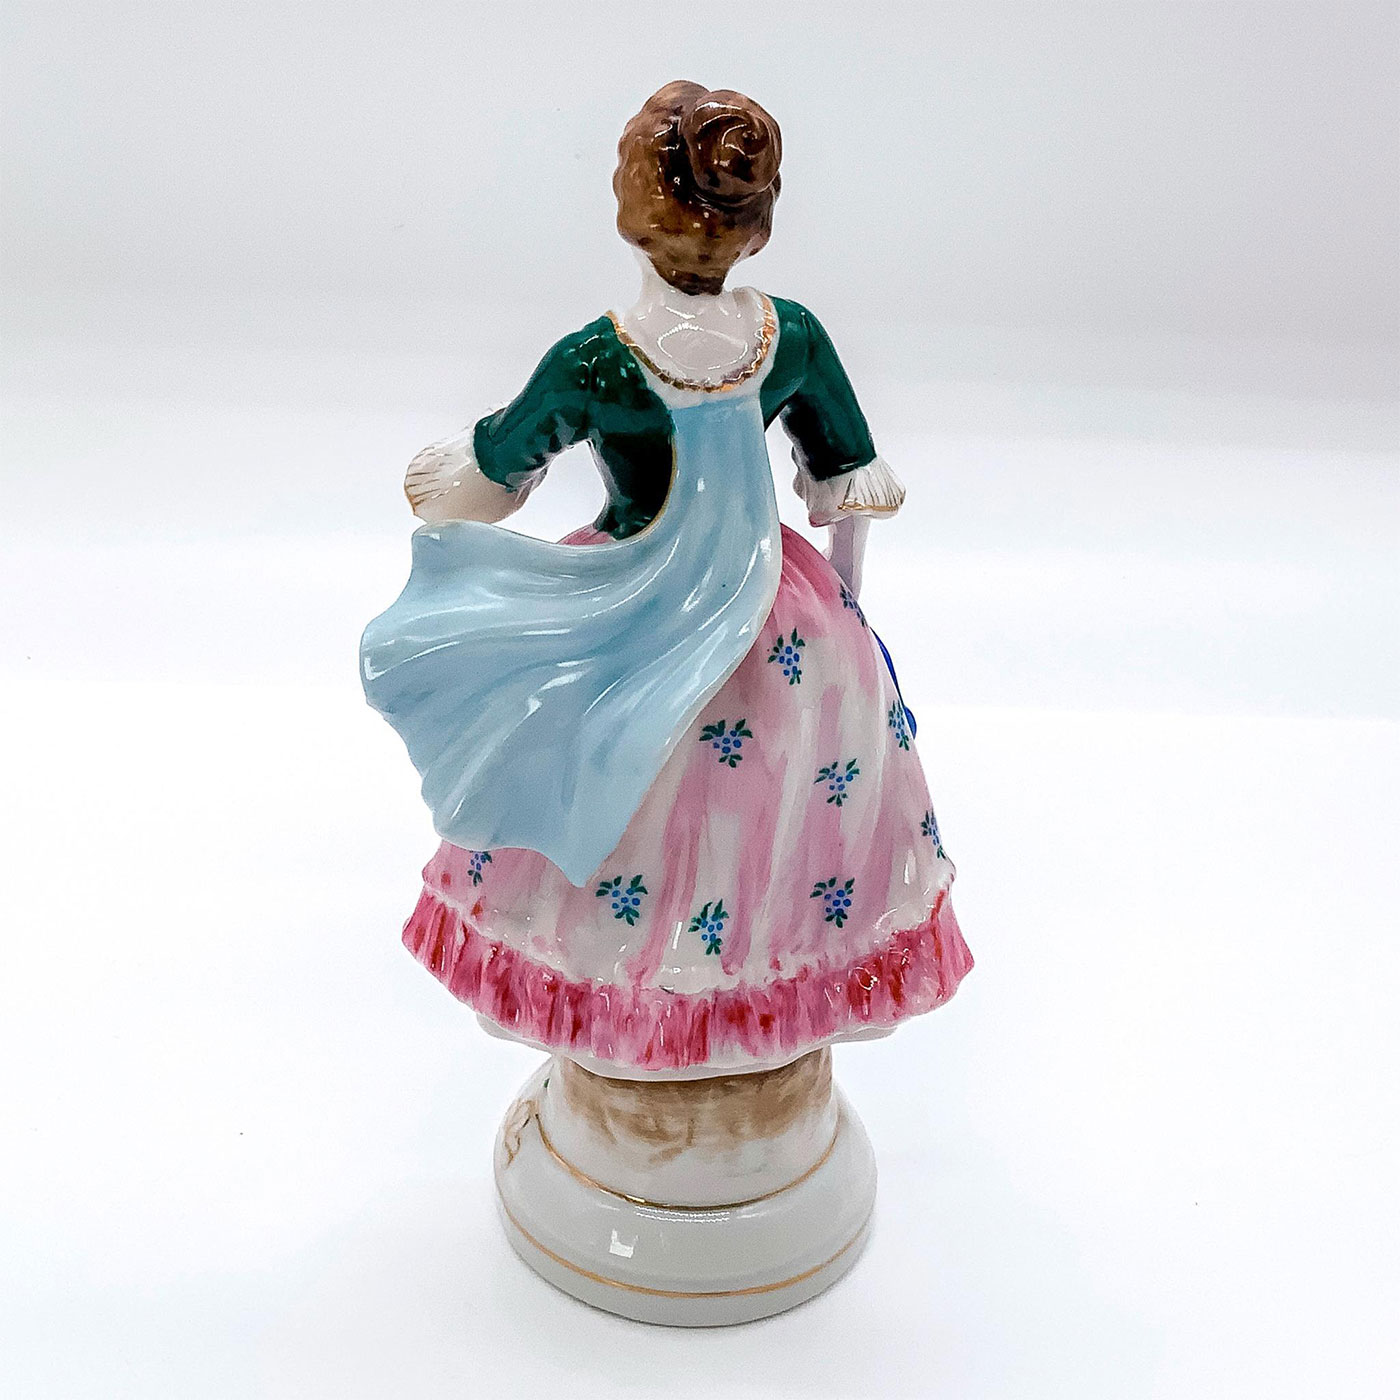 Vintage Occupied Japan Figurine, Colonial Woman - Image 2 of 3